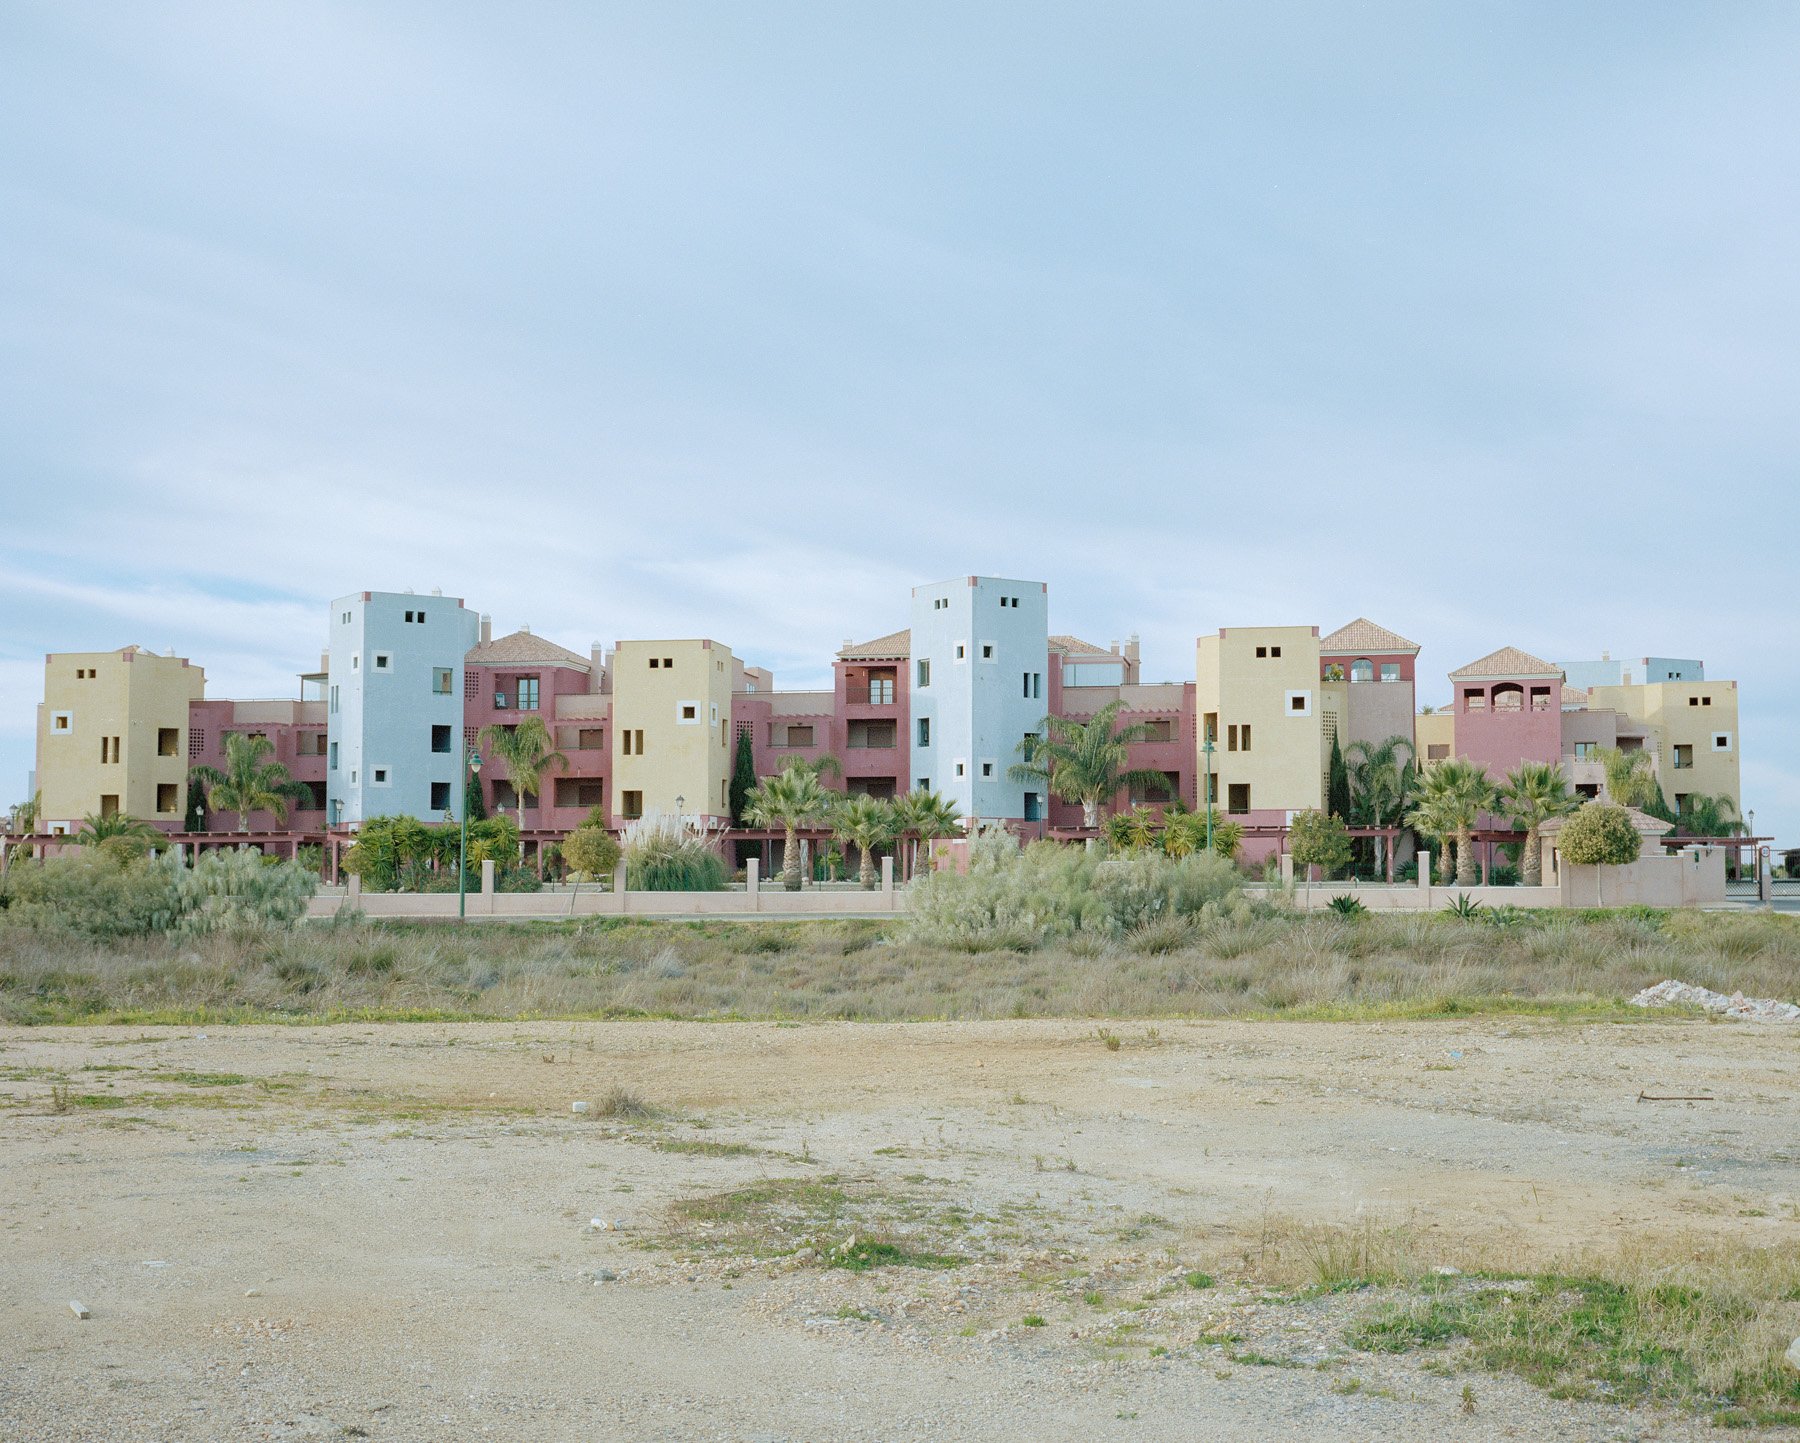  Spain, Ayamonte. 2015. Buildings on a beach of Ayamonte. Before the economical crisis Portugal and Spain strongly invest in civil construction, today several apartments built are empty while several buildings were left incomplete due to the lack of 